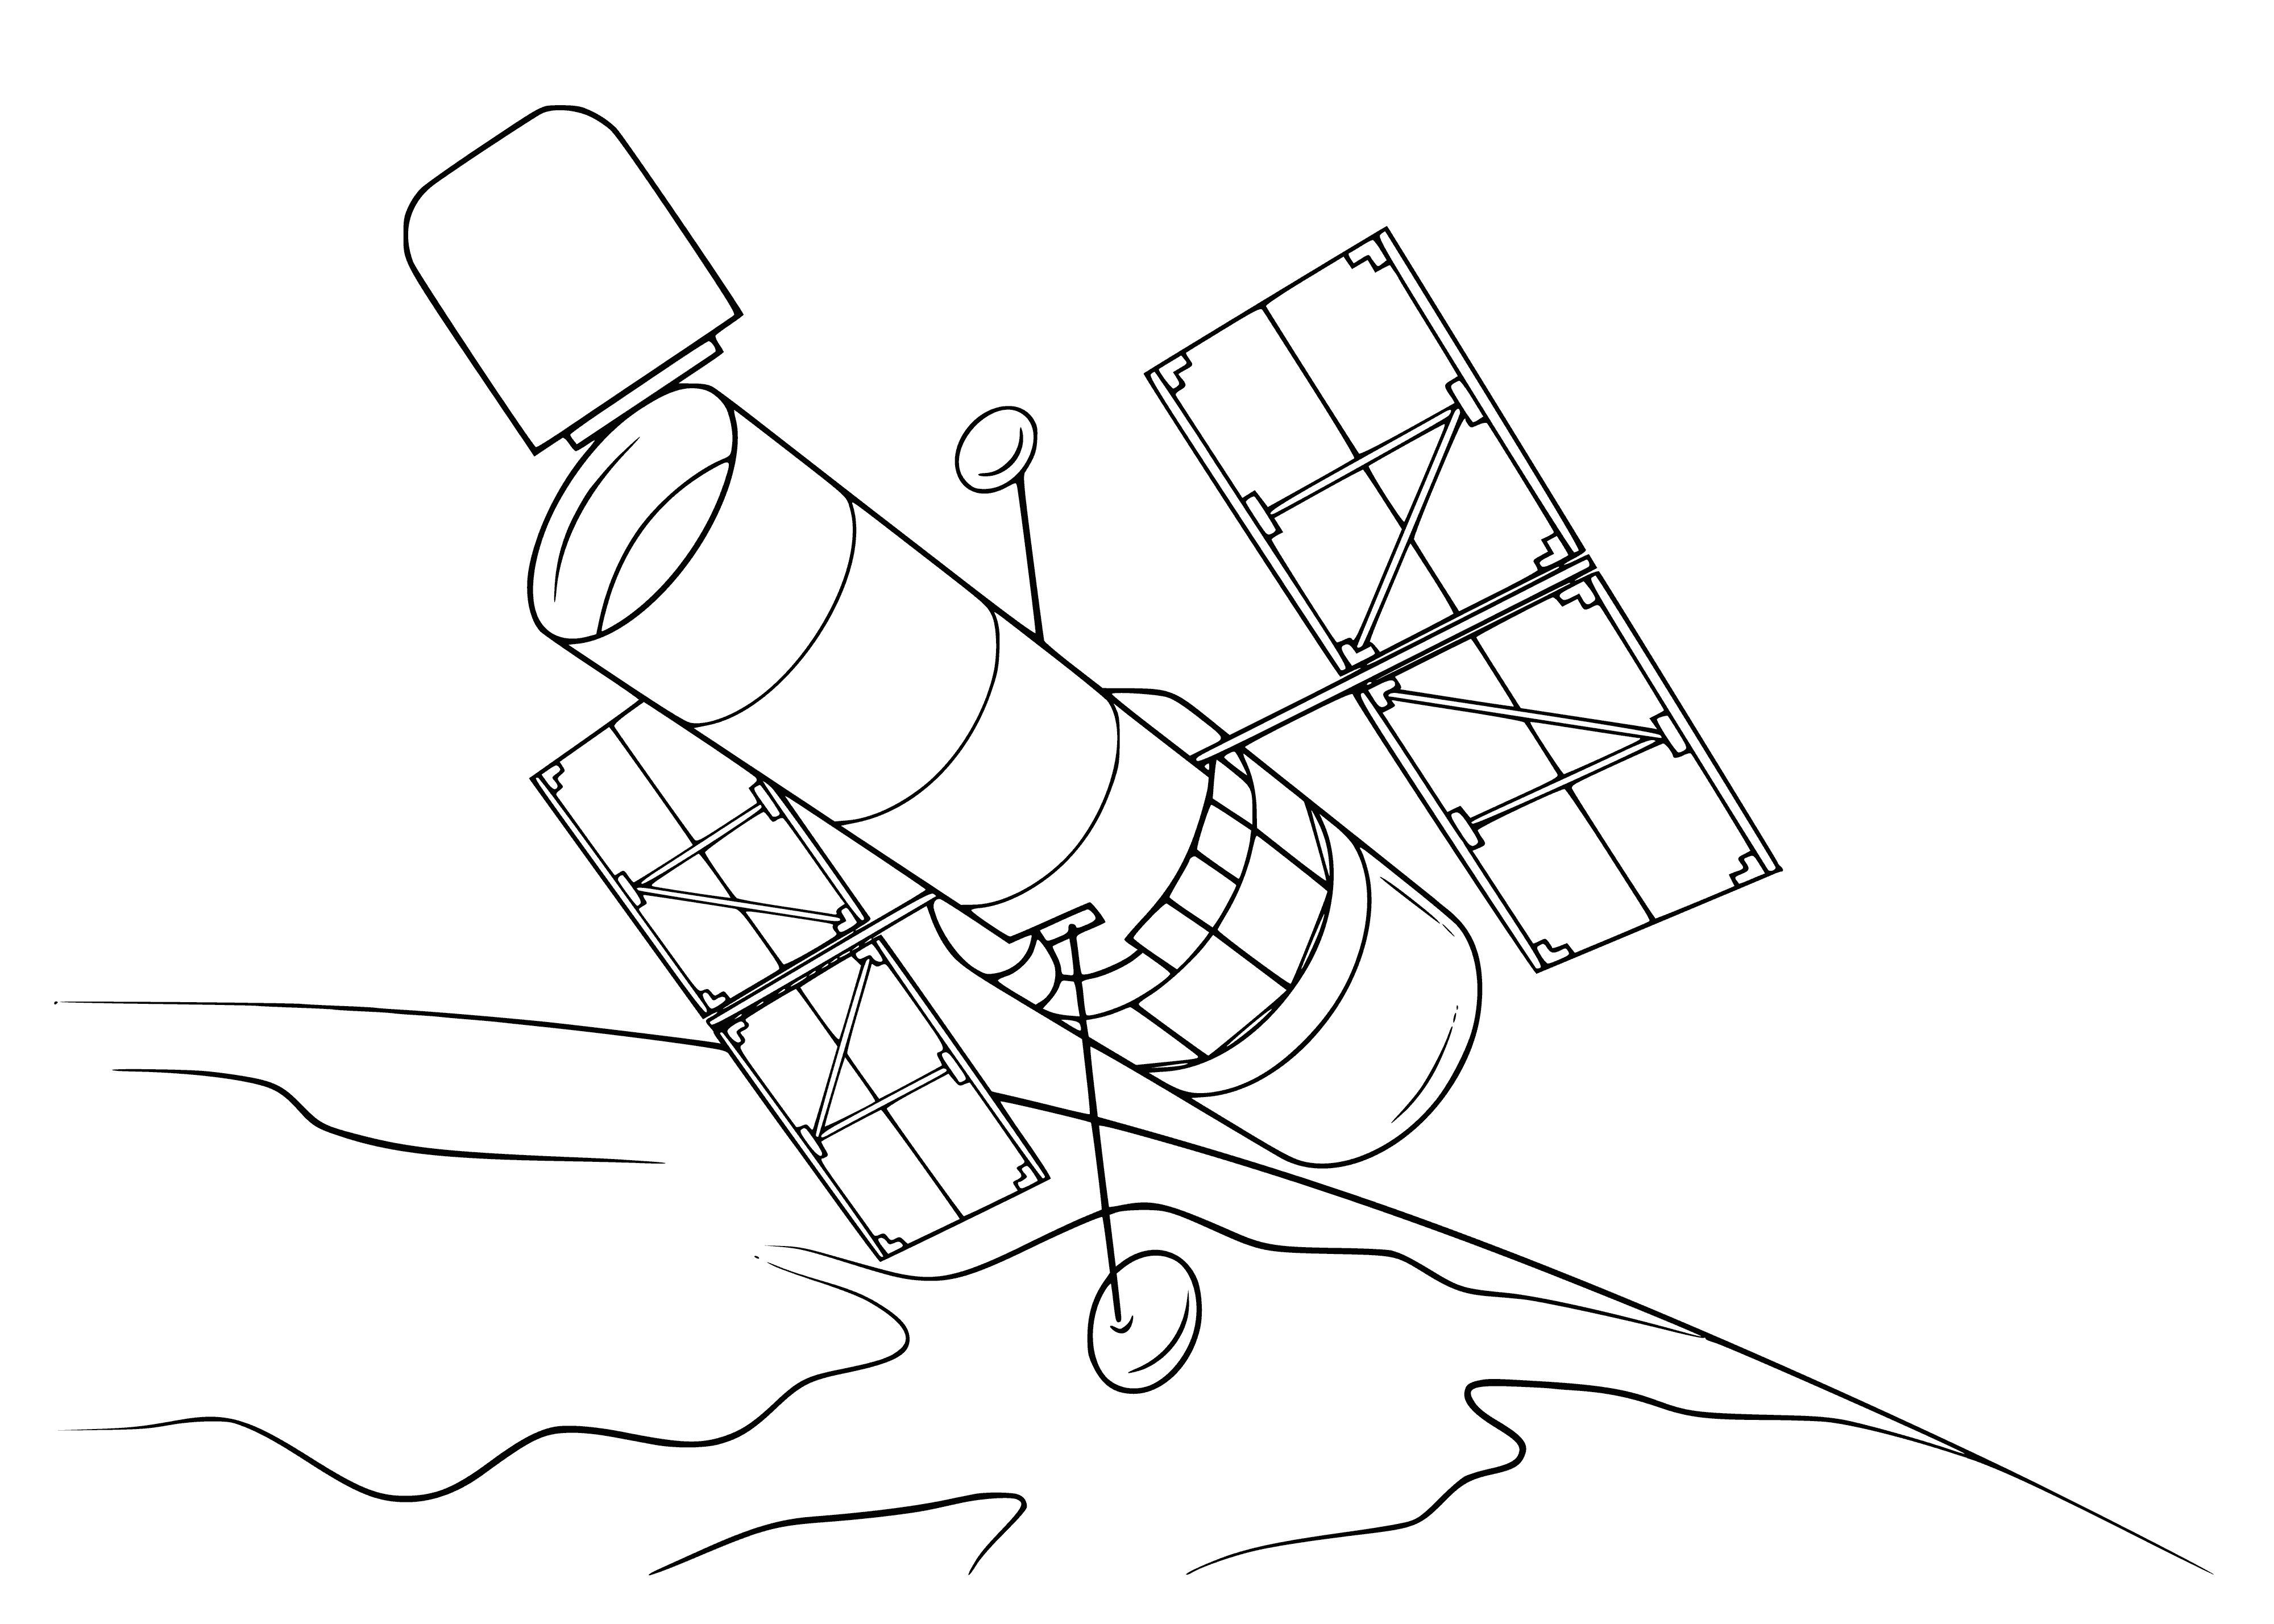 coloring page: A large metal object orbits a larger planet with smaller planets in the background.